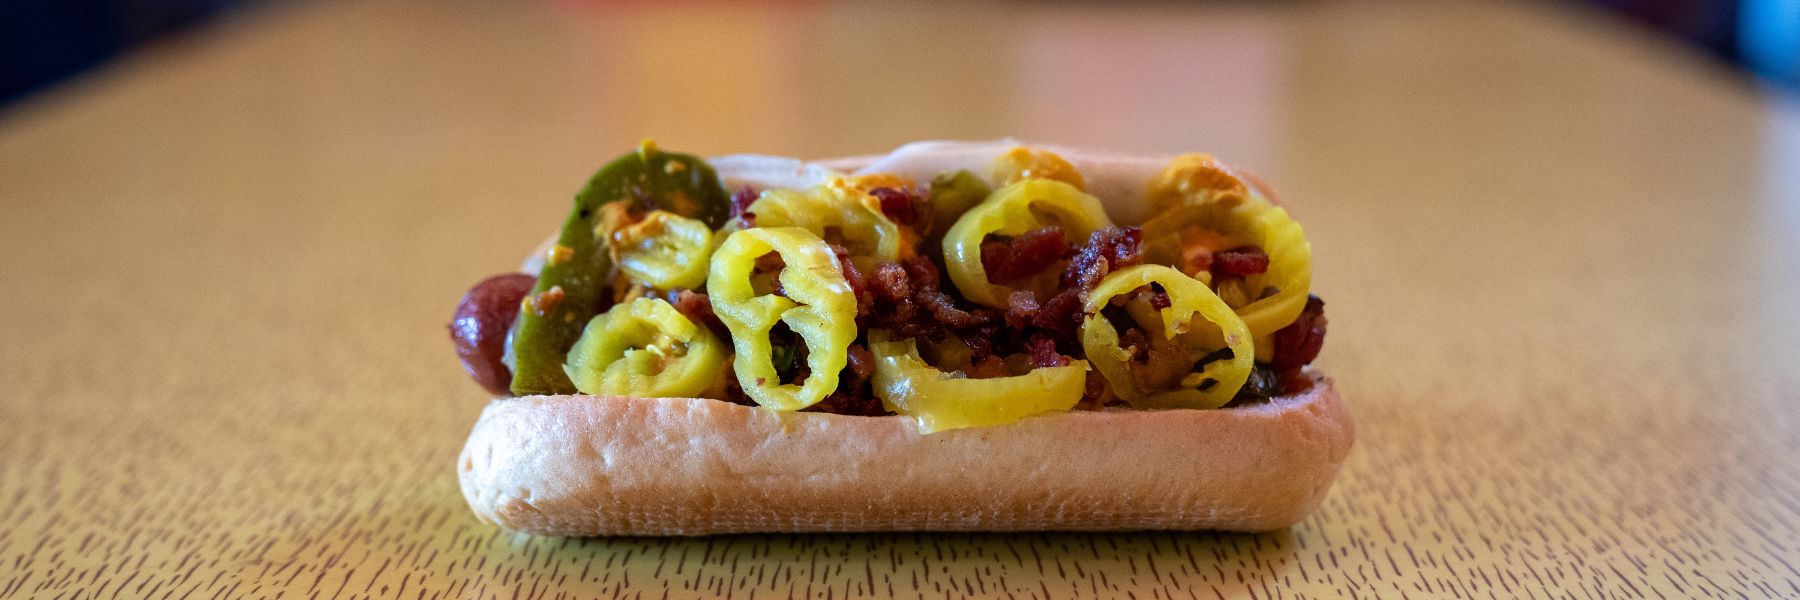 Steve's Hot Dogs is home to the St. Louis Dog.